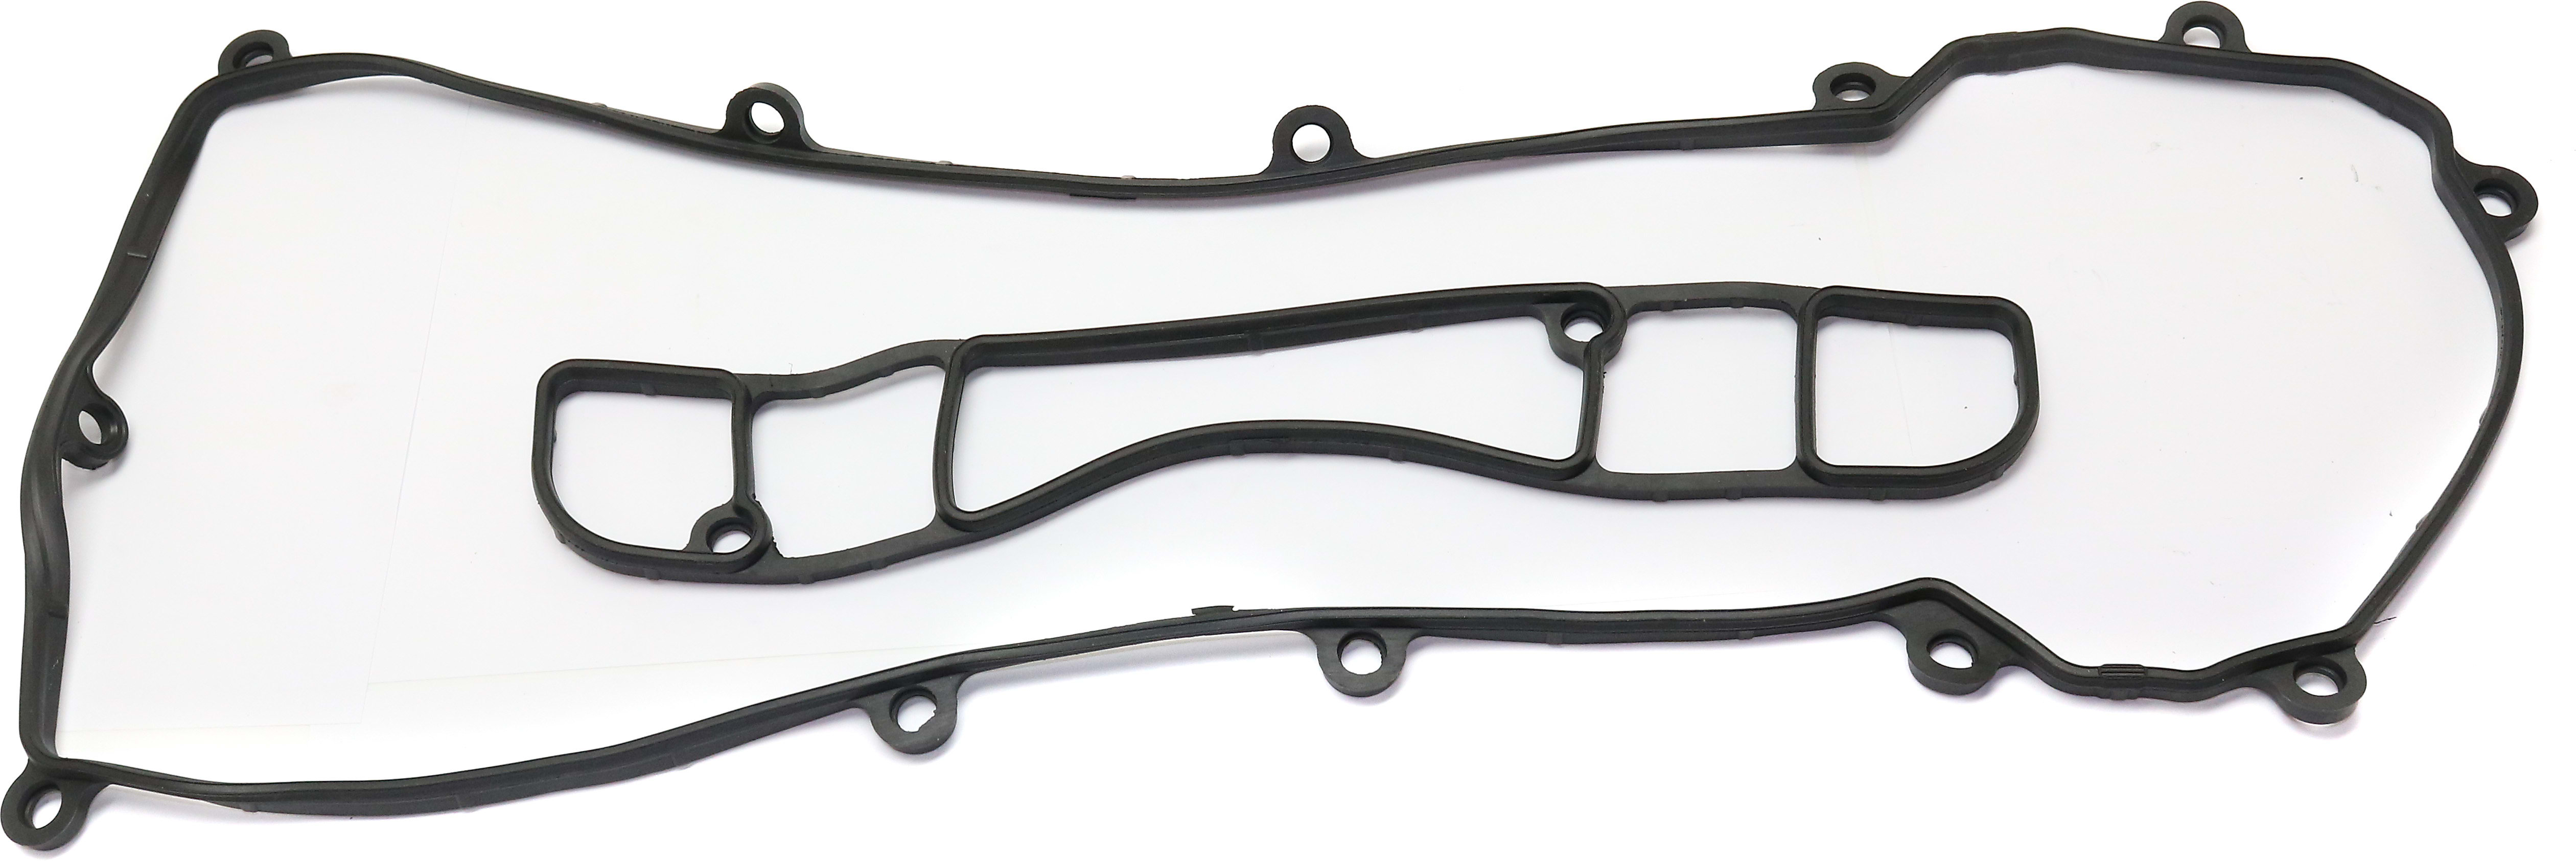 2008 Mazda CX7 Valve Cover Gaskets from 8